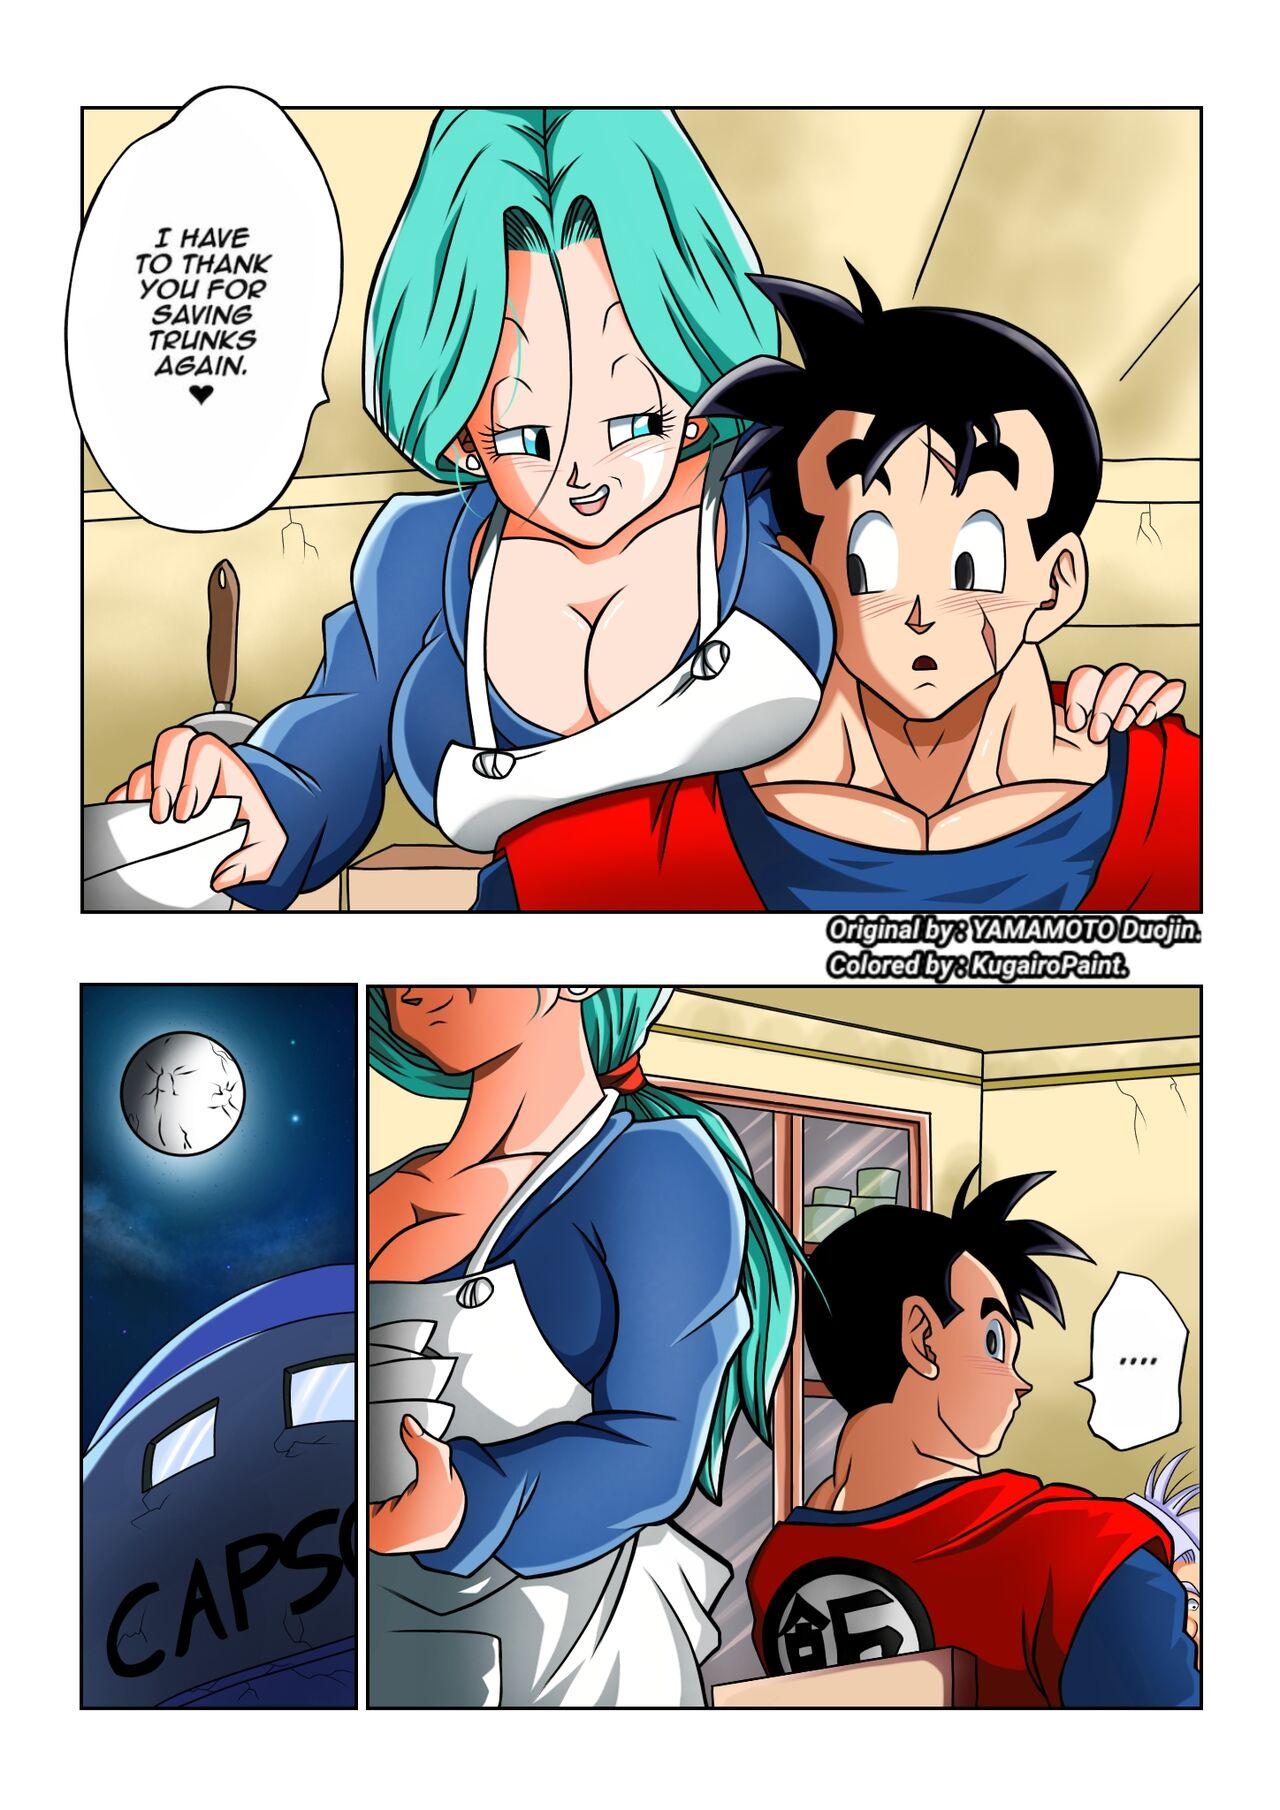 Fat Lots of Sex in this Future!! - Dragon ball z Lovers - Page 4